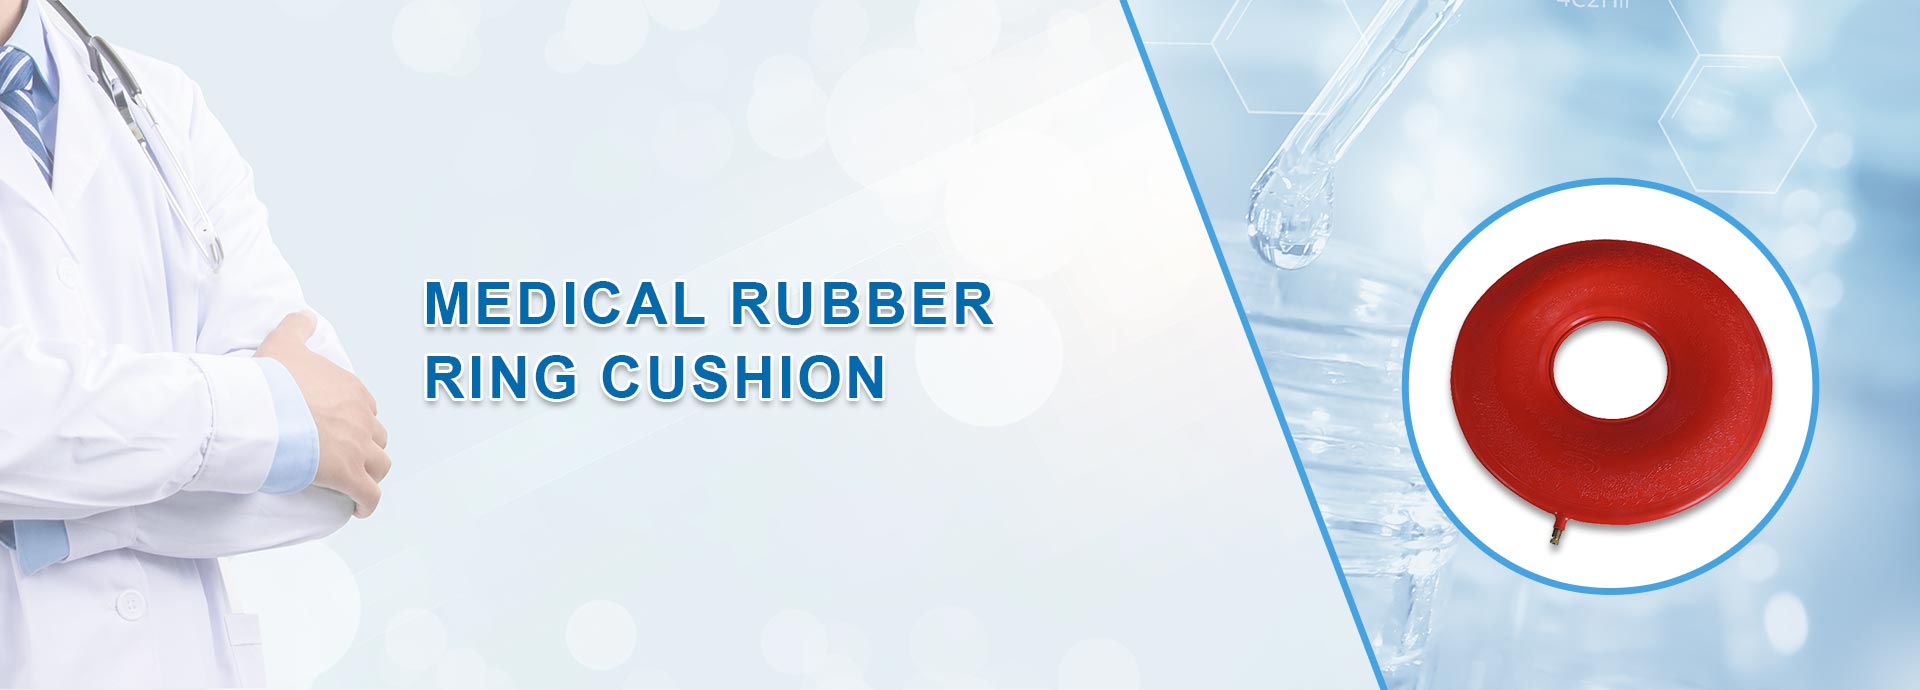 Medical rubber ring cushion